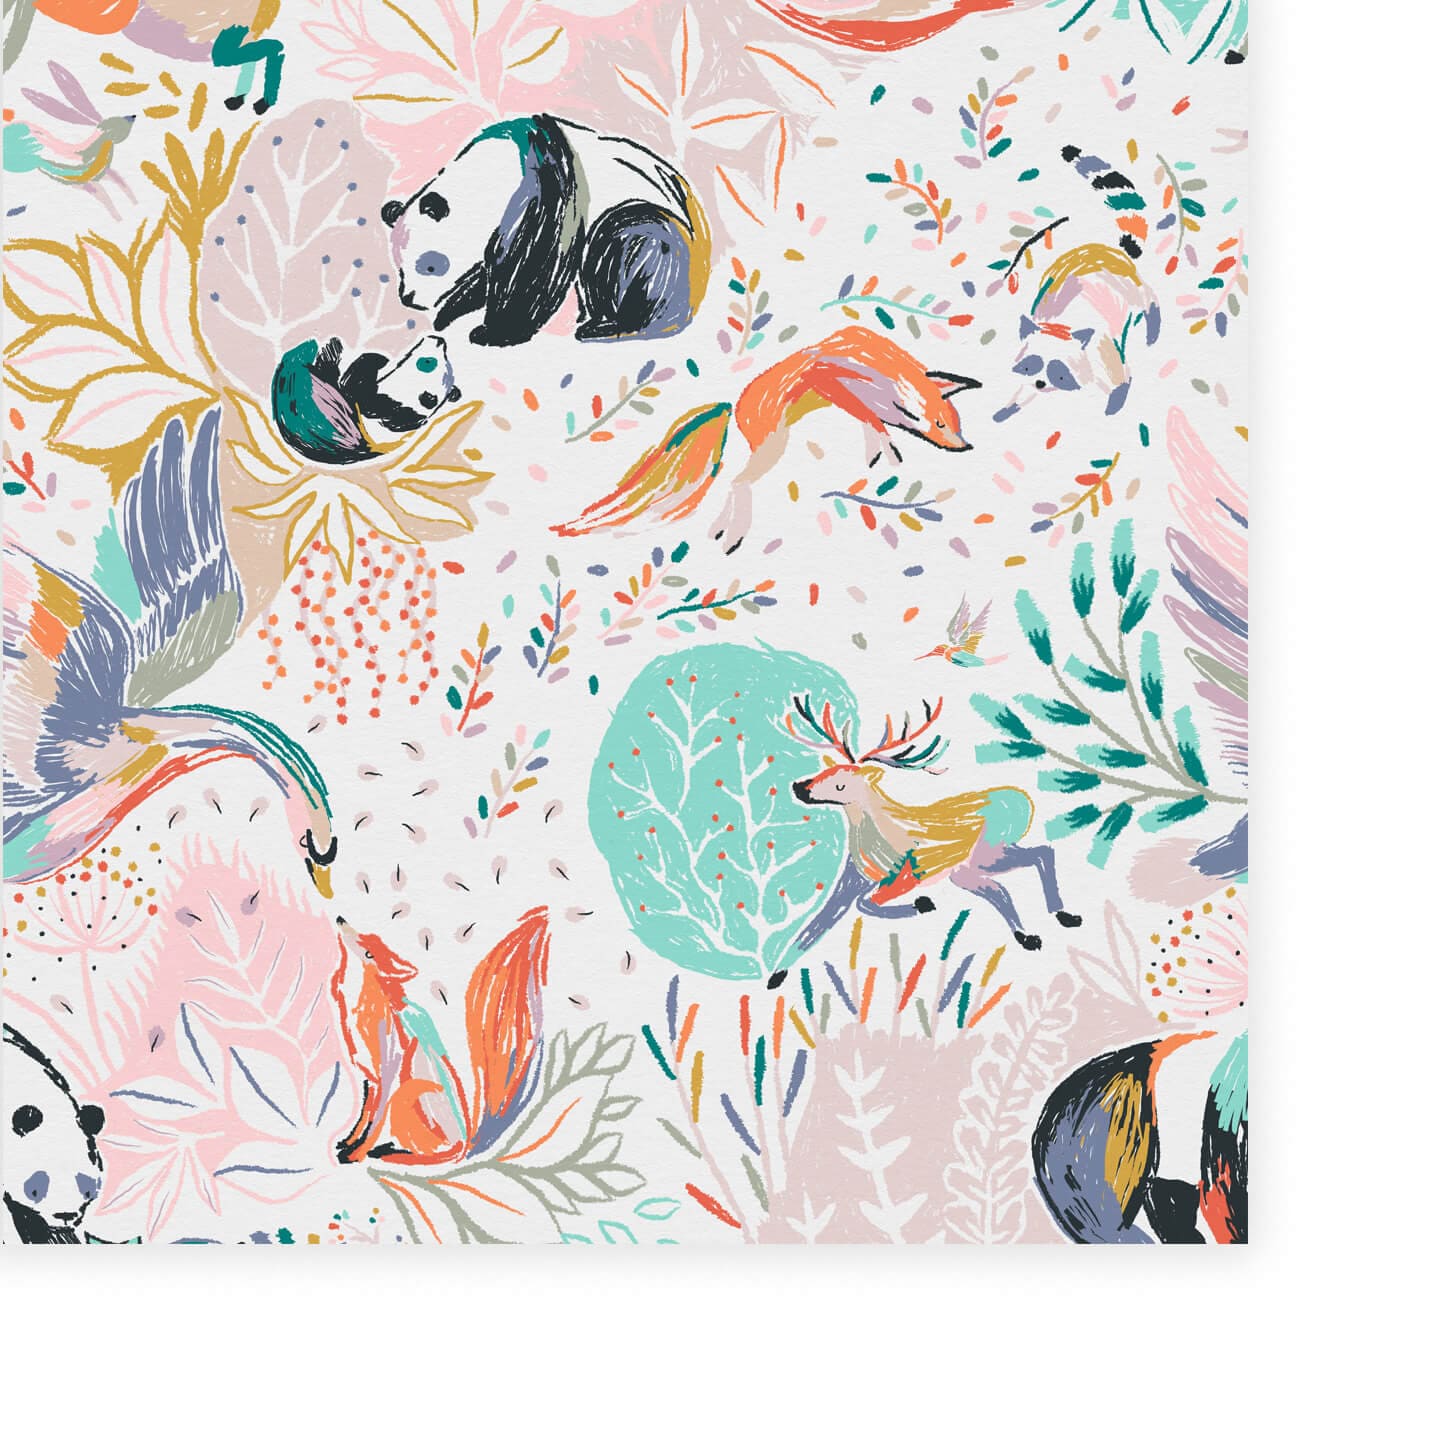 Wallpaper of a mummy panda and baby panda, a leaping deer, a fox, swan, racoon, rabbit with floral artwork surrounding.